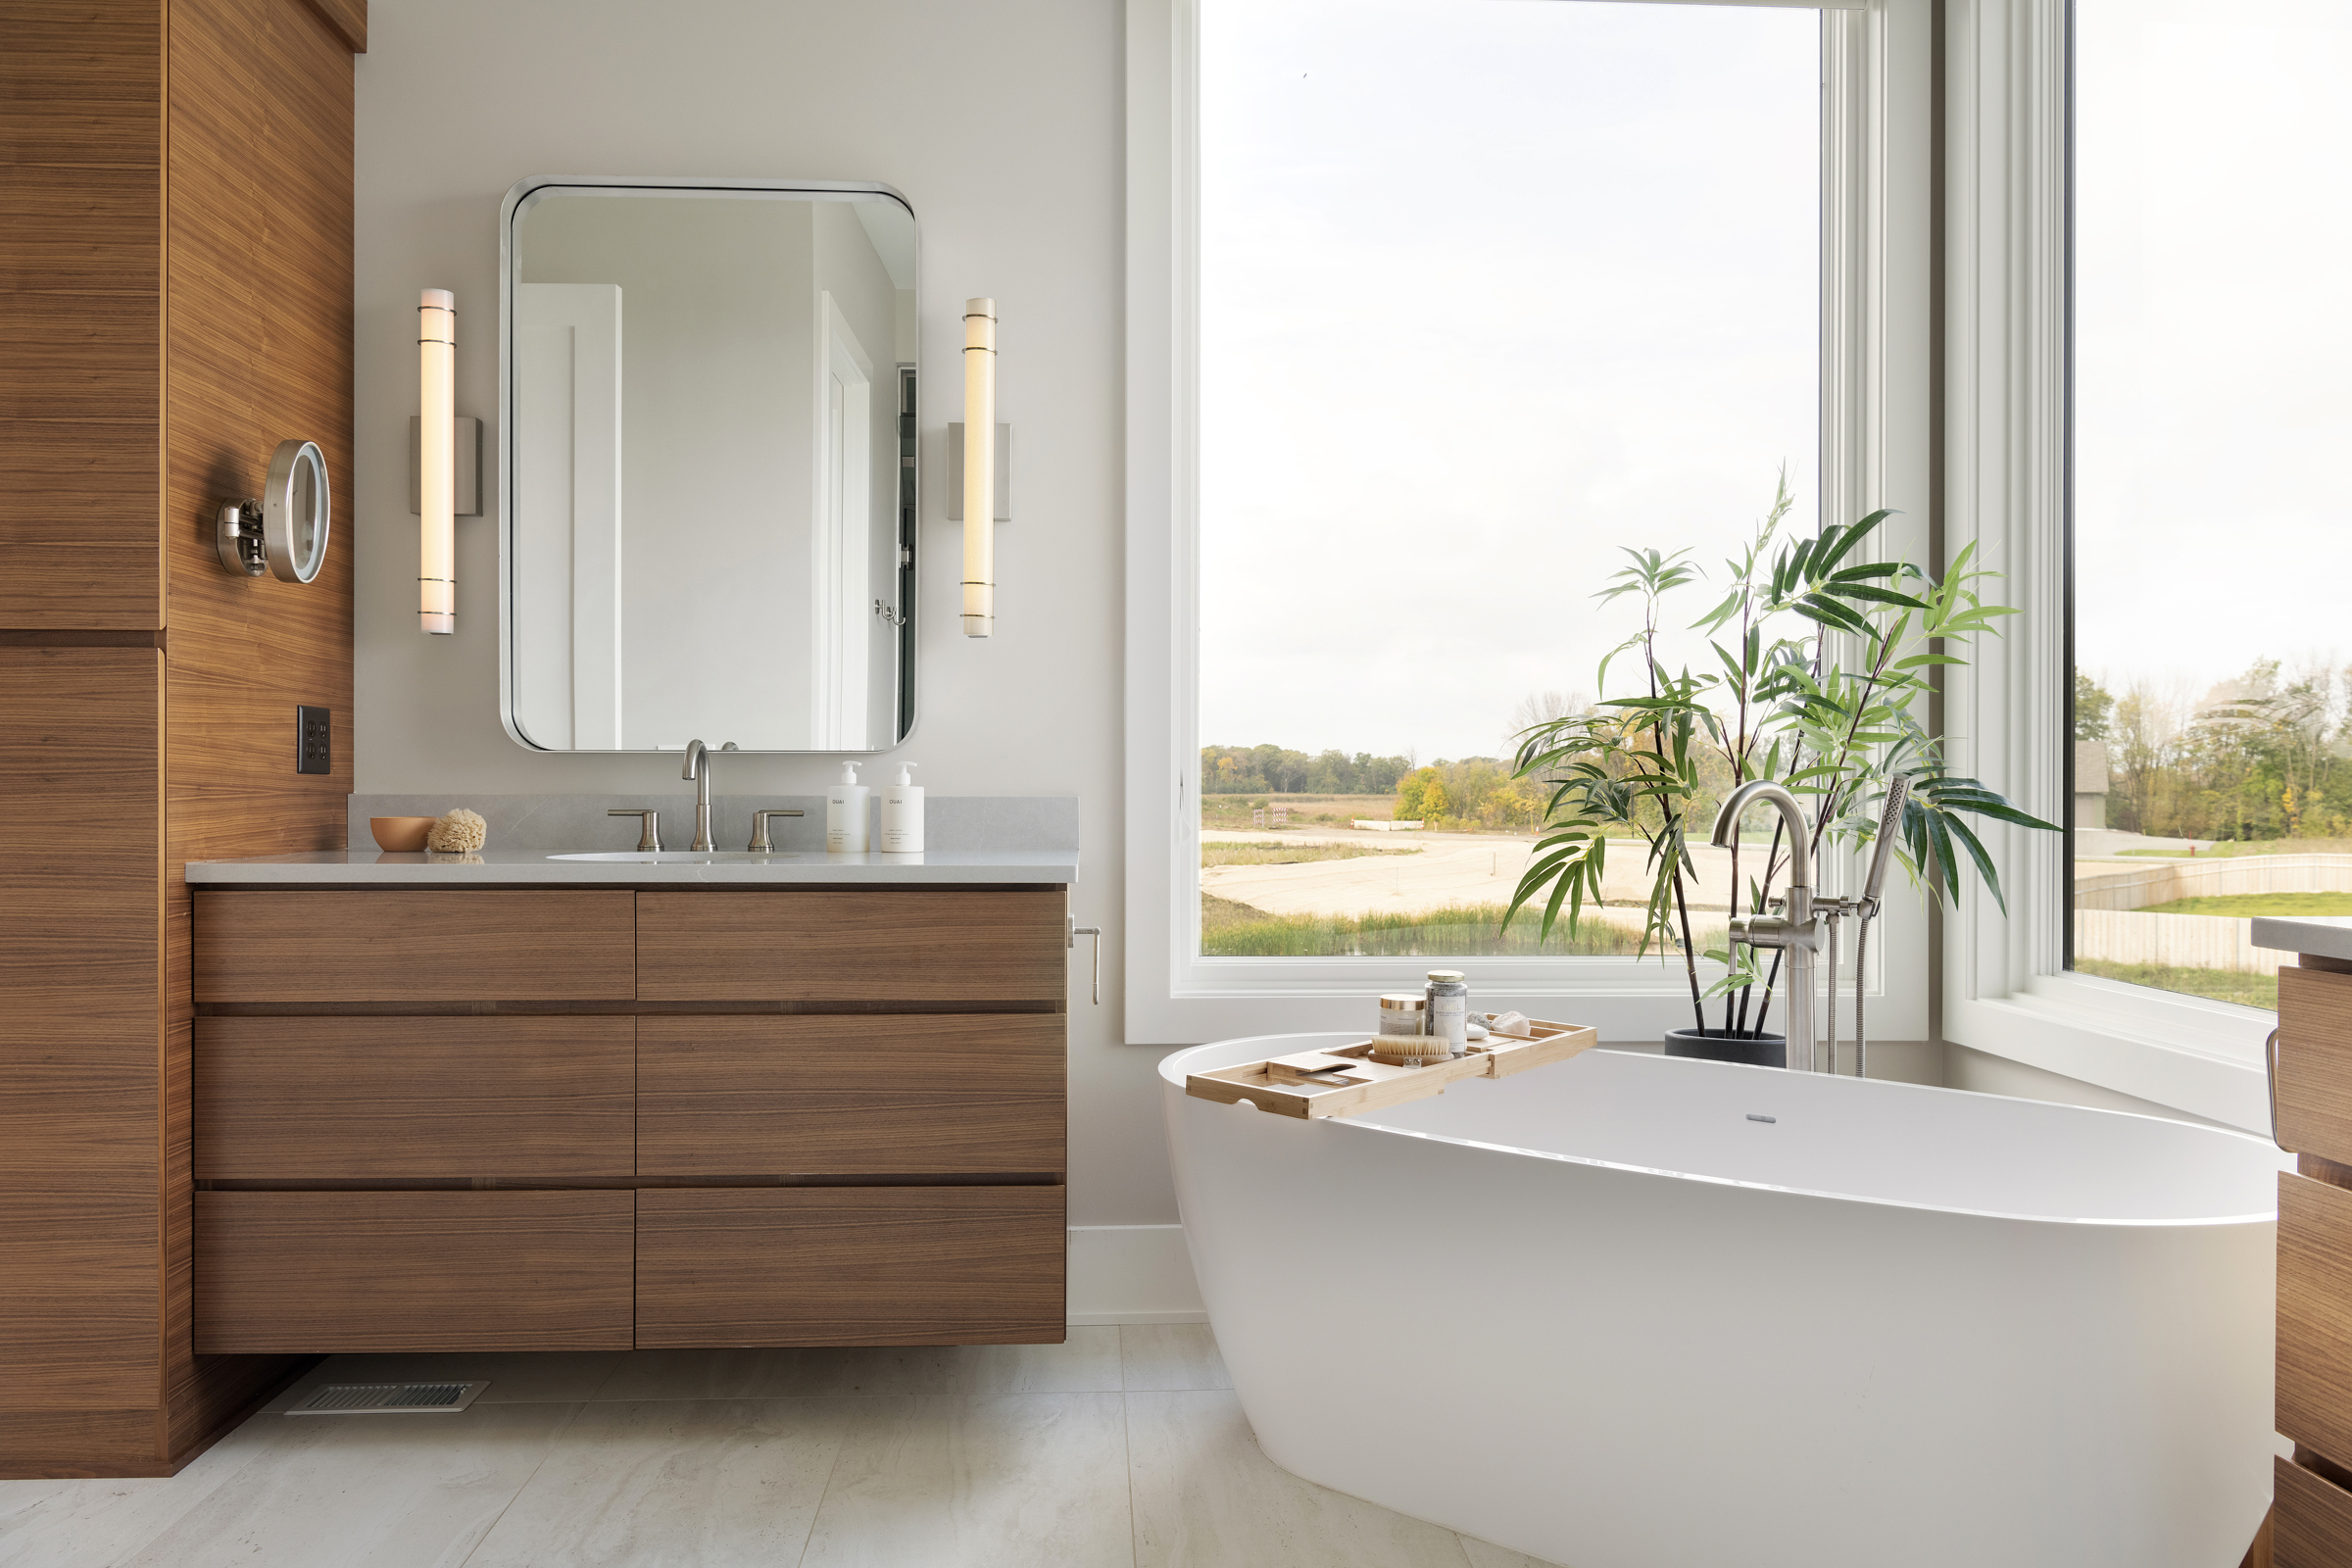 A prairie transitional custom home with a modern bathroom featuring wooden cabinets and a bathtub.